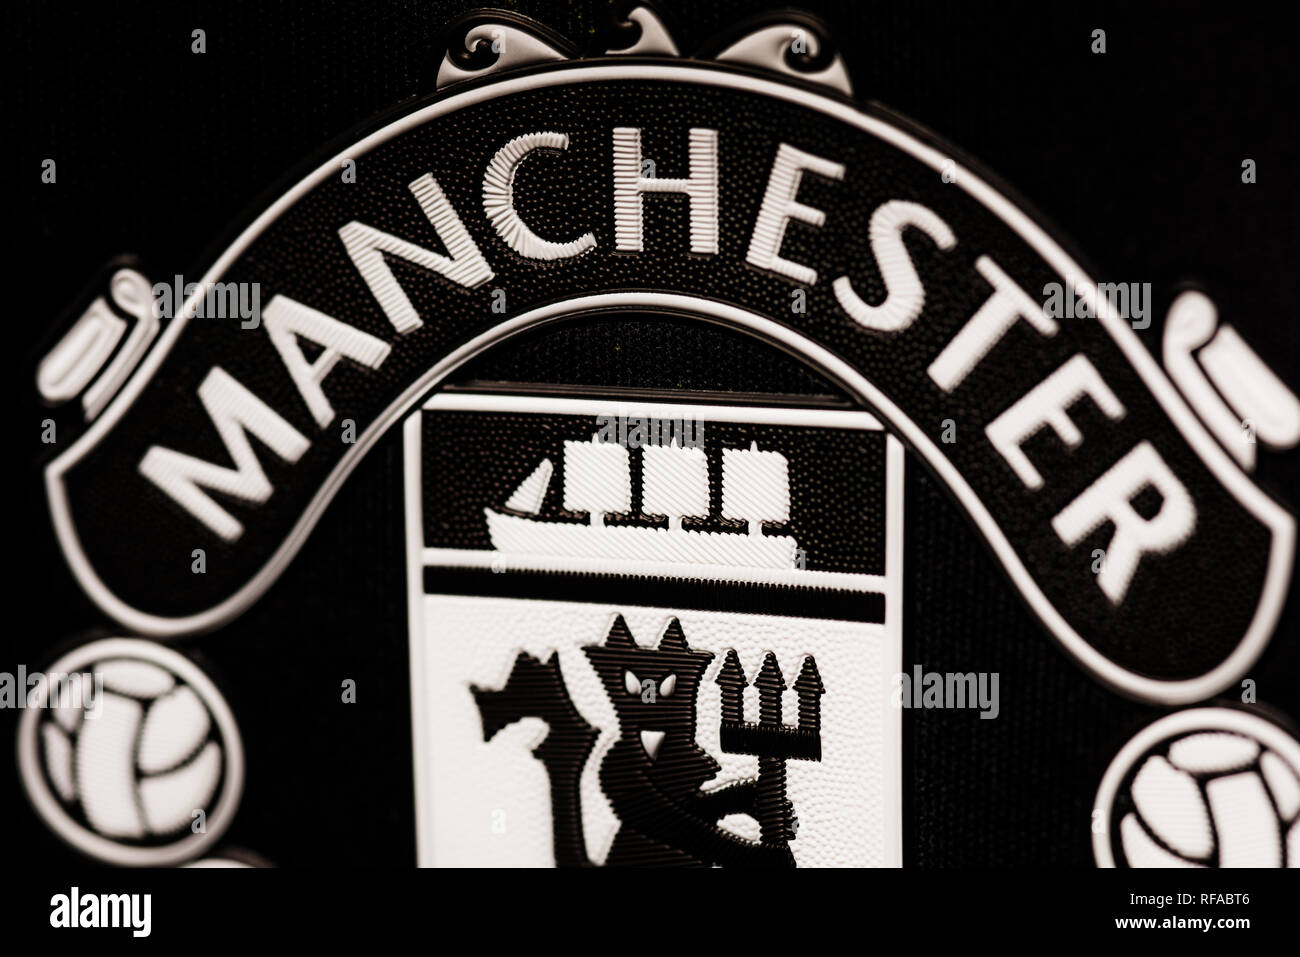 Manchester United EA Sports Limited Edition Jersey. Stockfoto